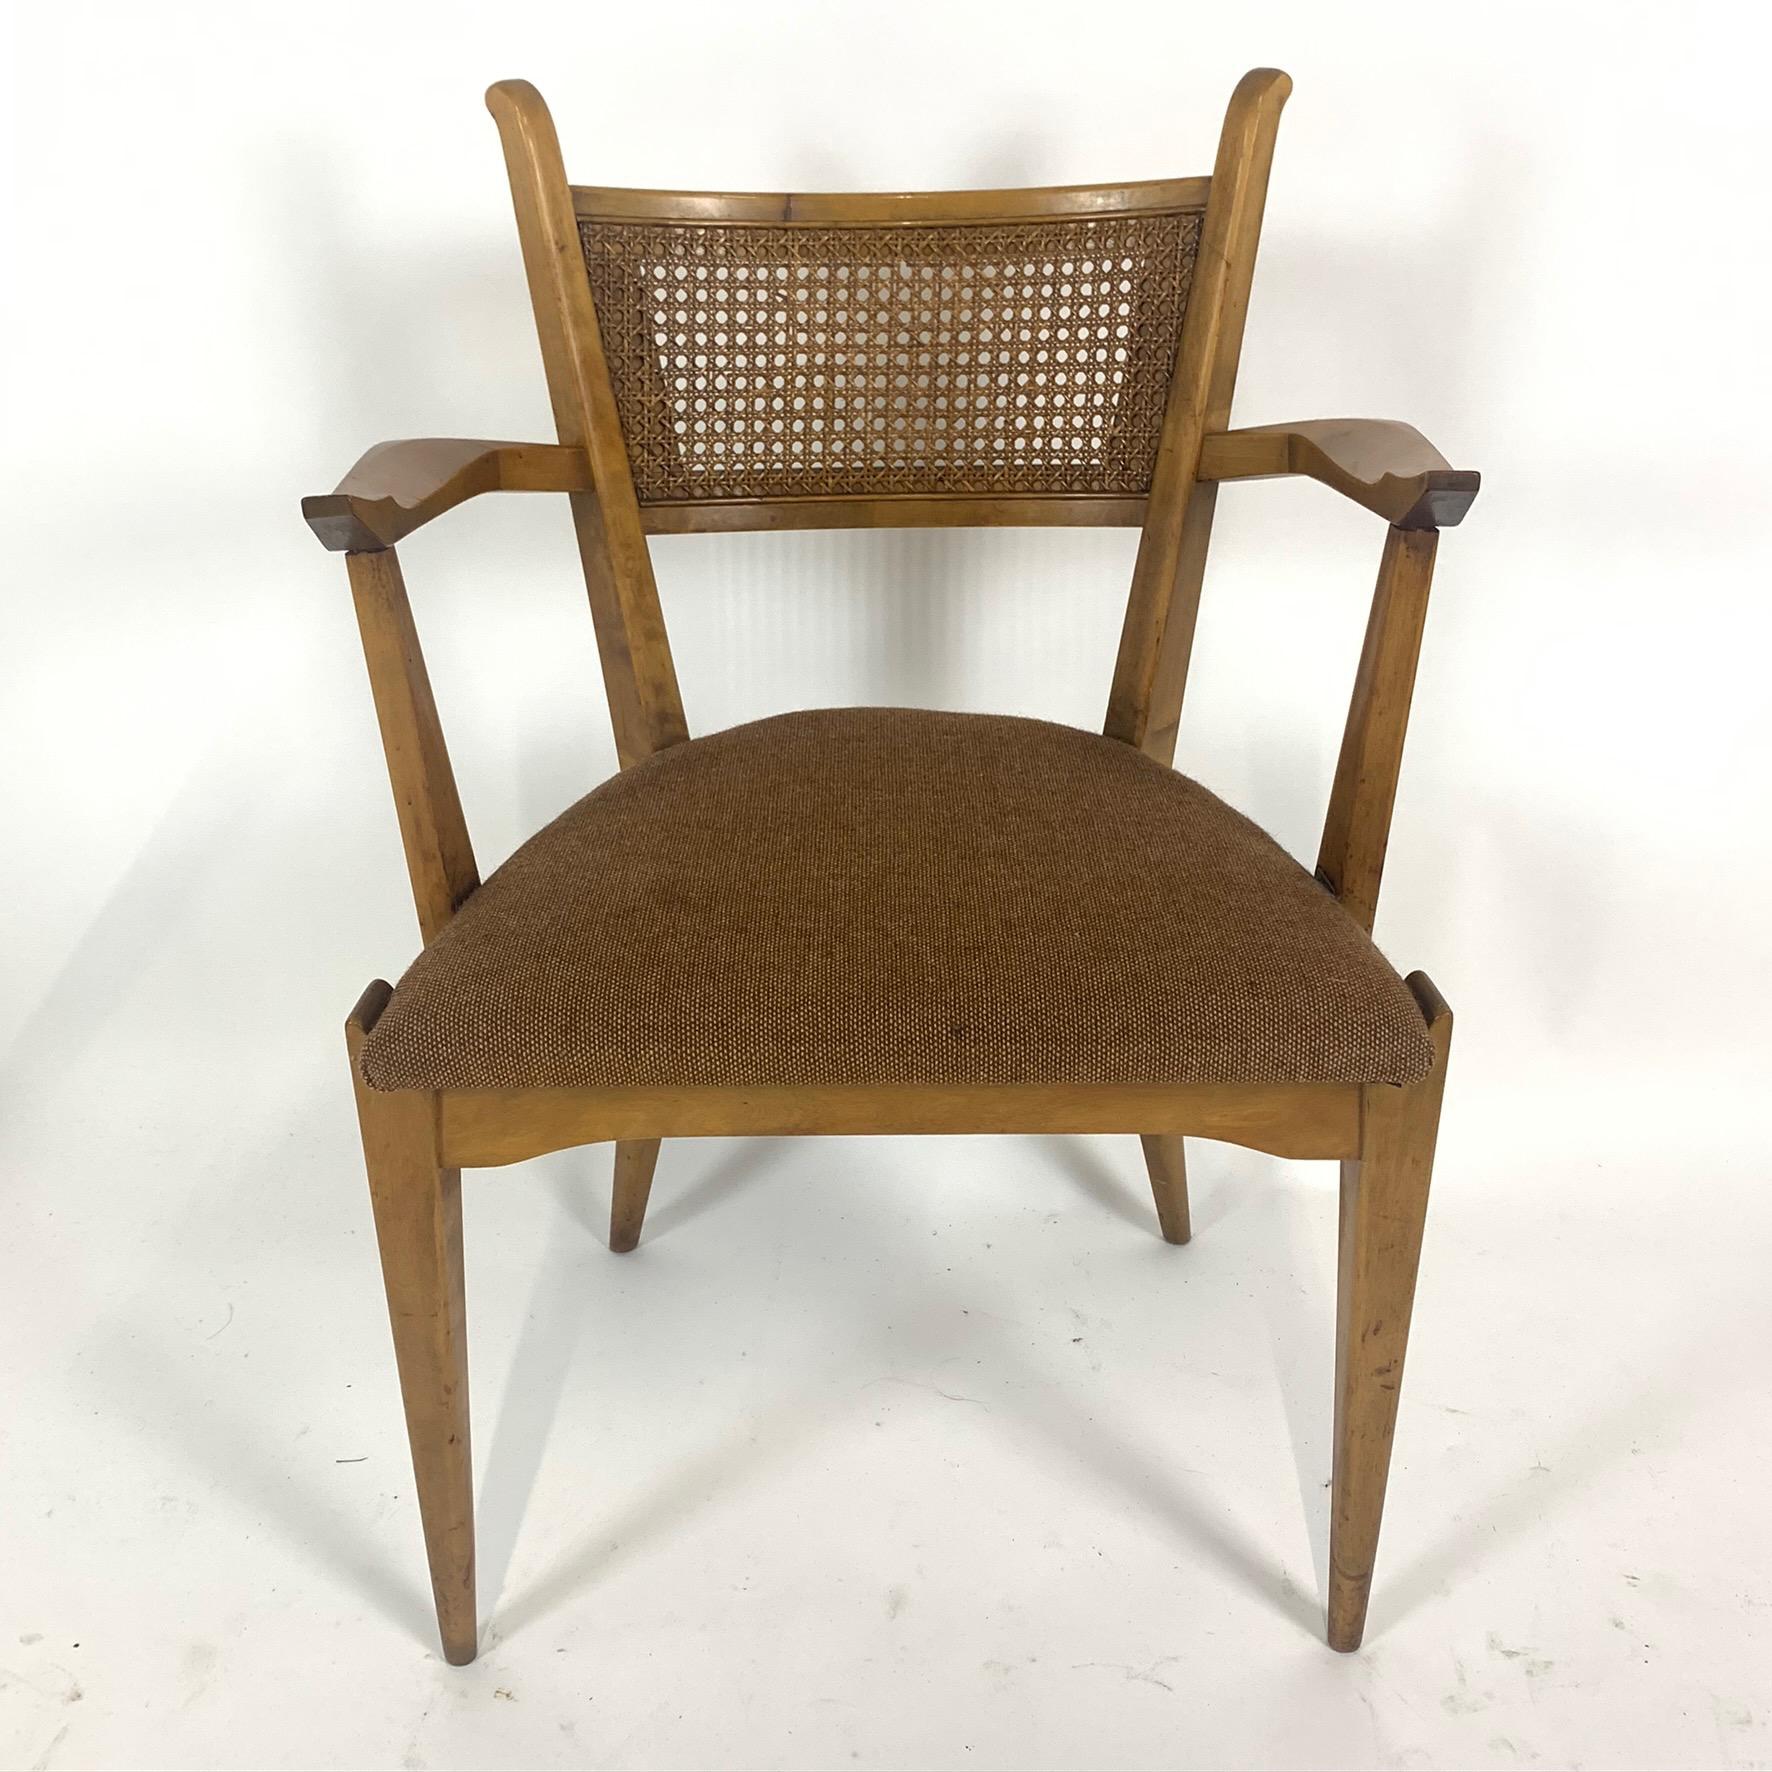 Rare Set of 6 Swedish Modern Cane Back Sculptural Dining Chairs by Edmond Spence 7